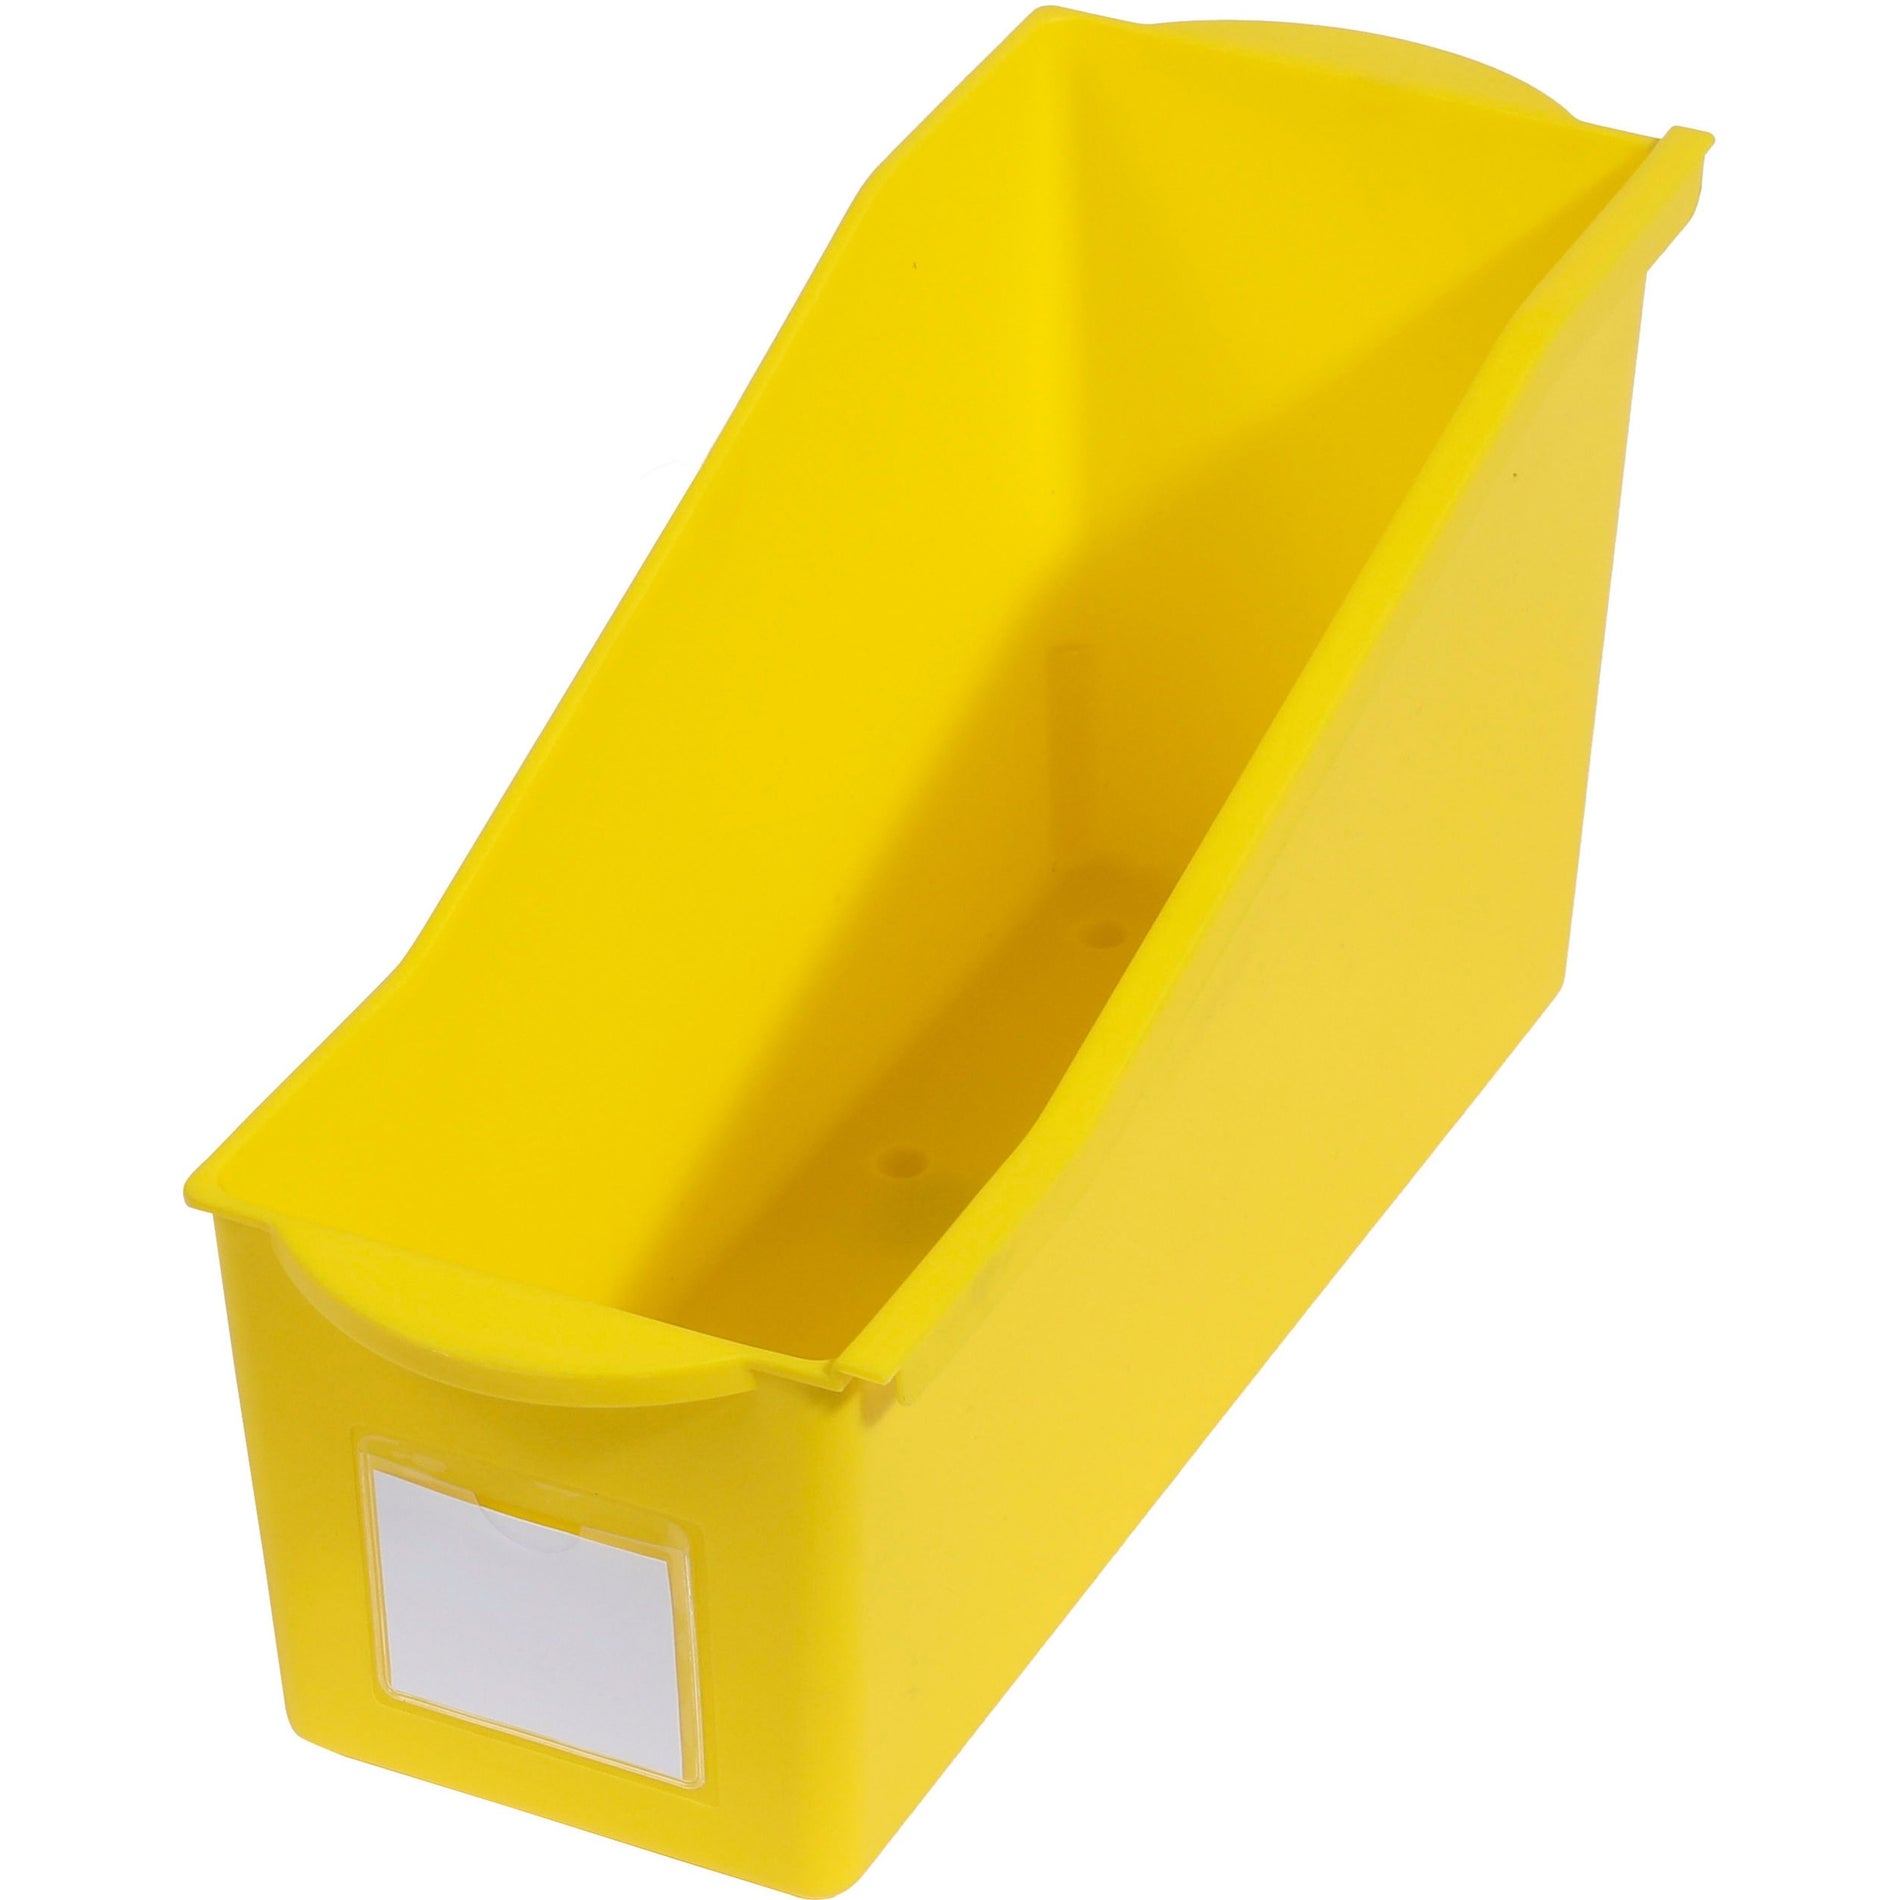 Deflecto Antimicrobial Kids Book Bin - Lightweight, Portable, Stackable - Yellow [Discontinued]